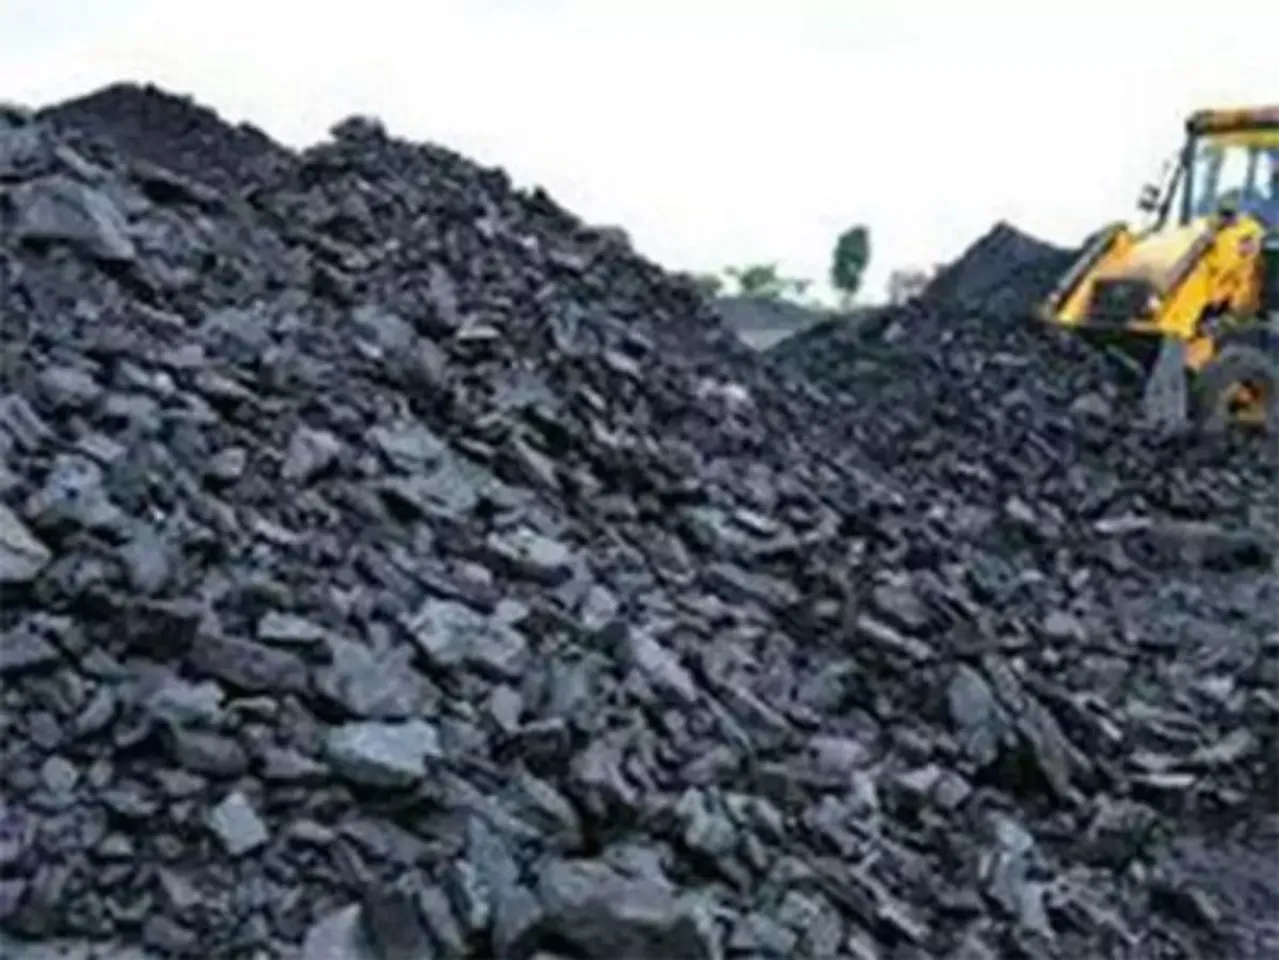 Domestic coal prices to remain high in current quarter as well: Icra